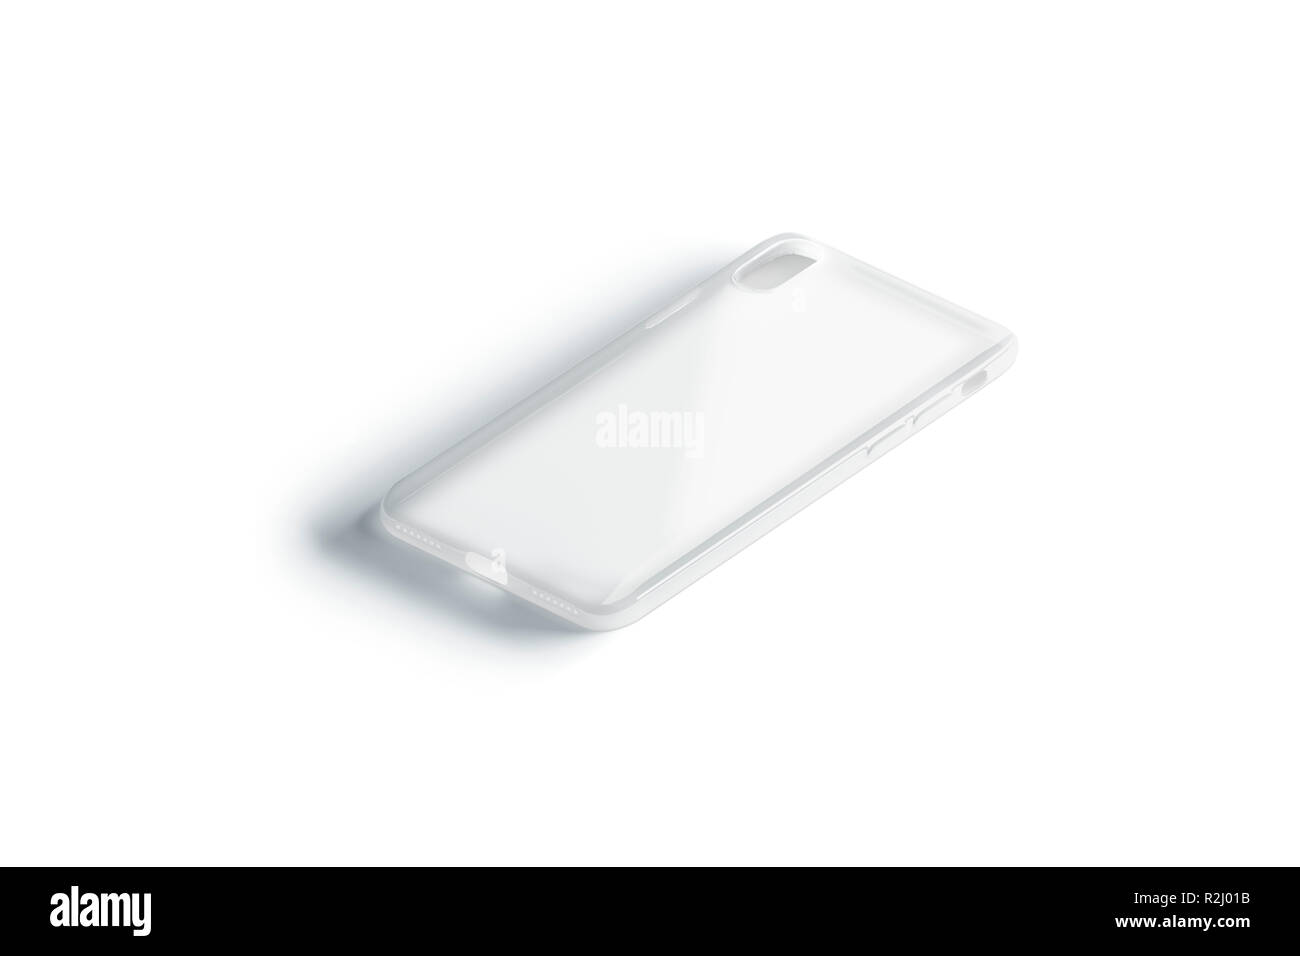 Blank transparent phone case mockup, isolated, side view, 3d rendering. Empty accessories for mobile mock up. Clear frosted telephone casing. Plastic gadget protection template. Stock Photo